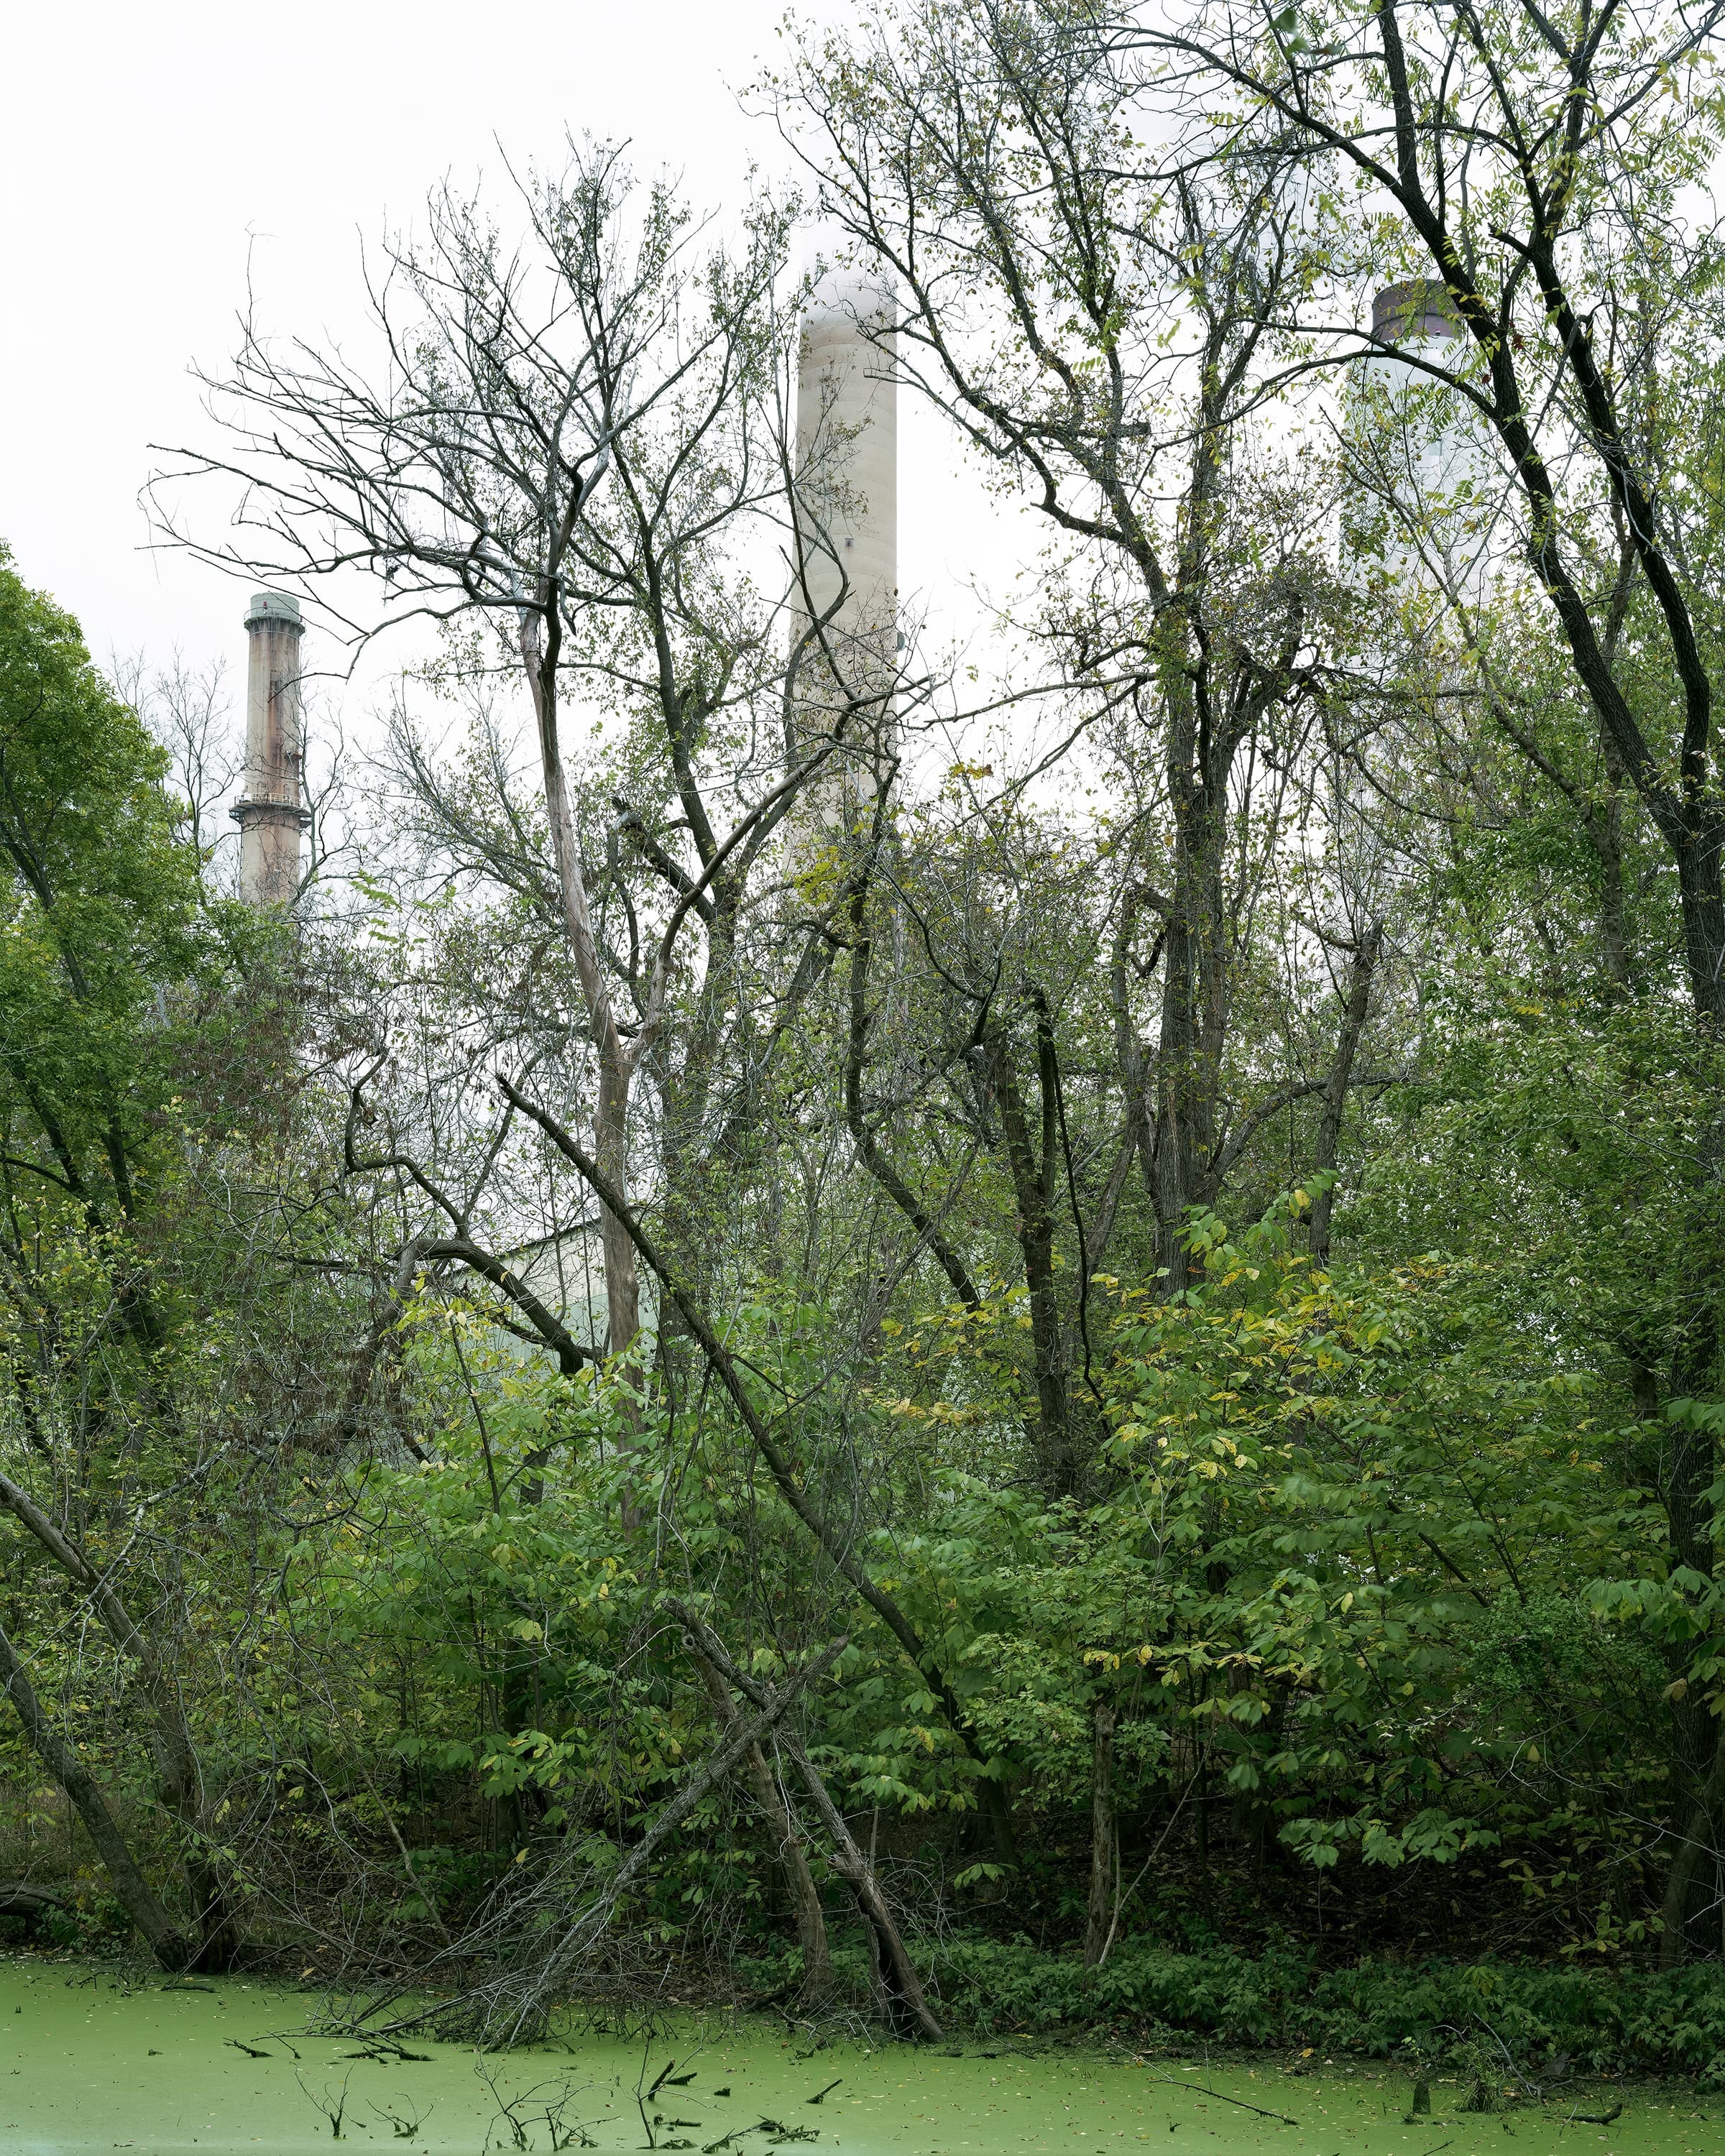 Two towers of the power station behind the trees rise above a green algae covered canal.